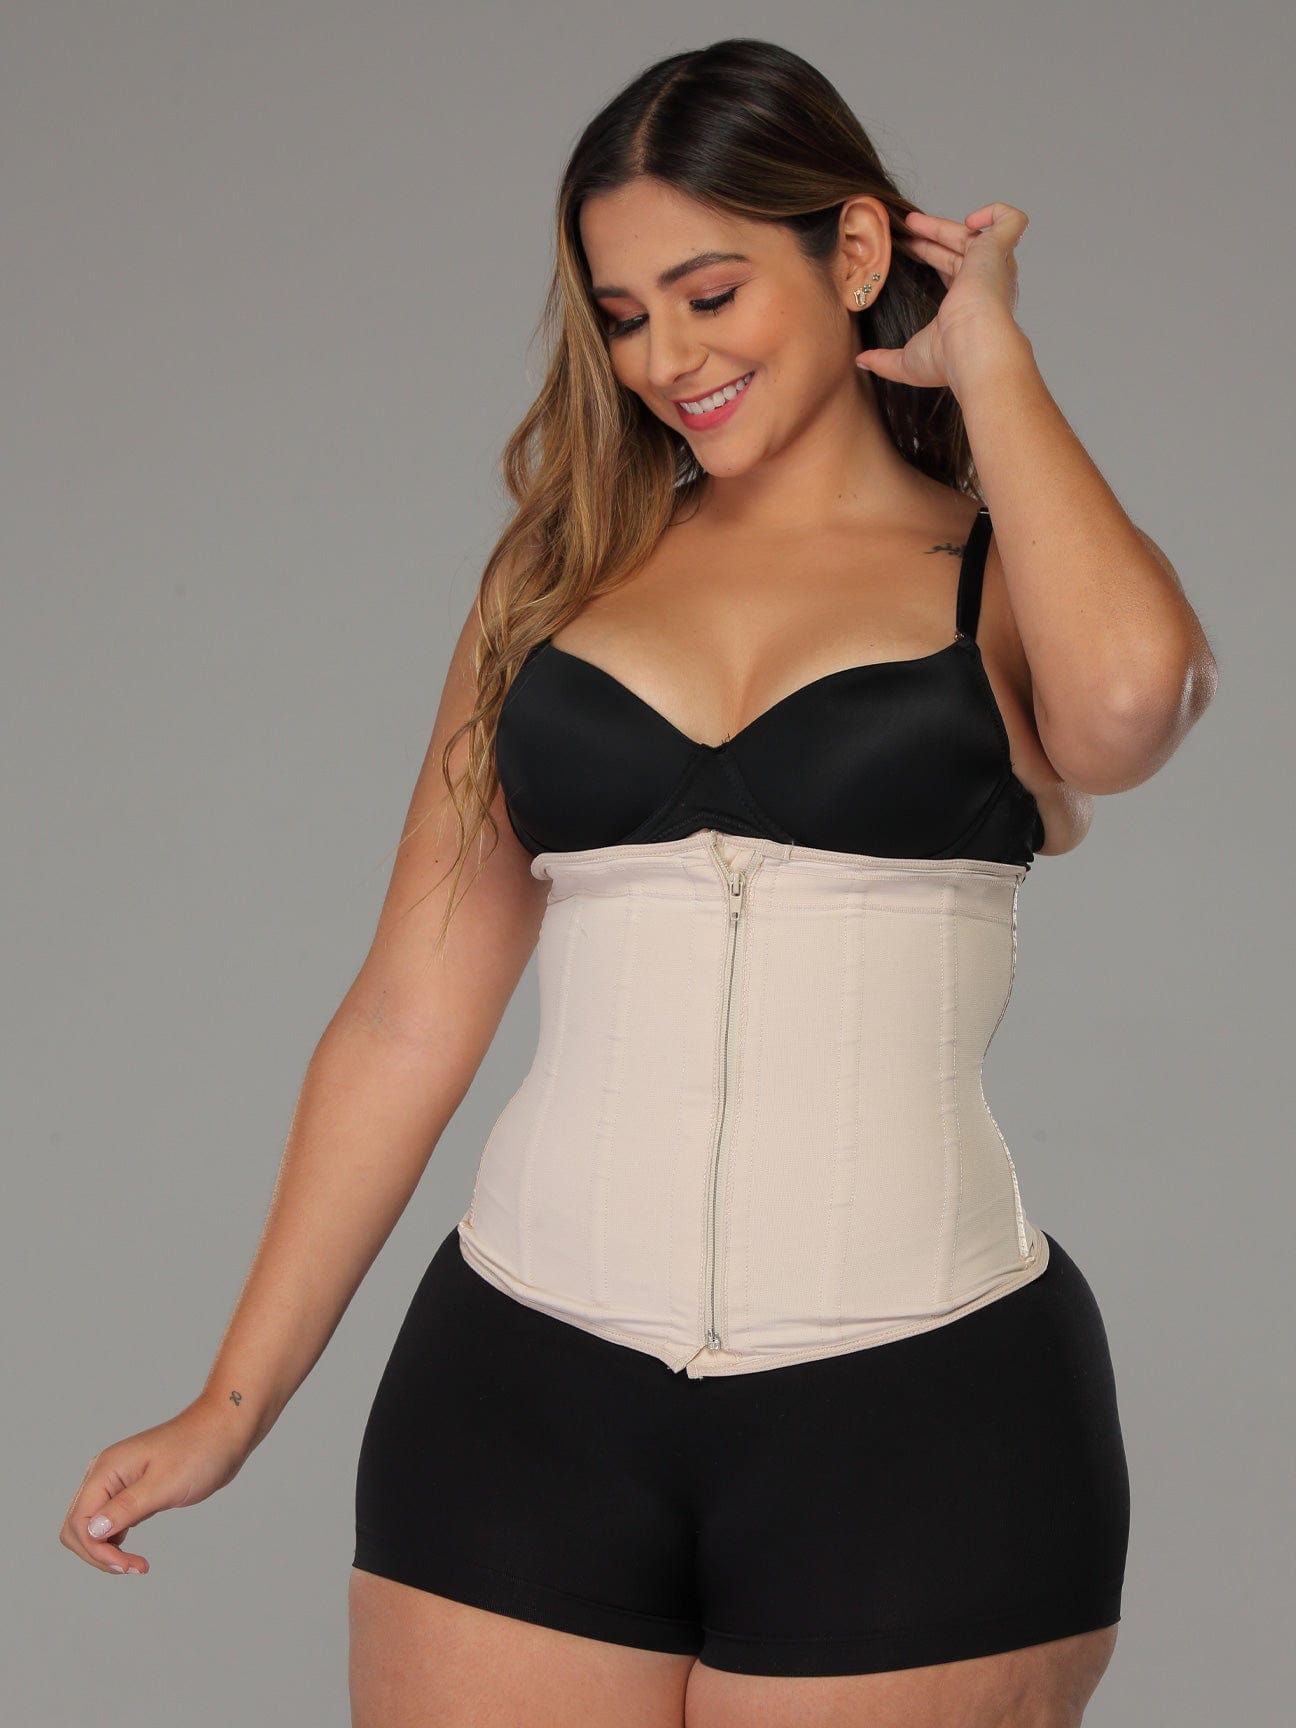 Strapless Waist Cincher Corset full body front view plus sized model beige color.